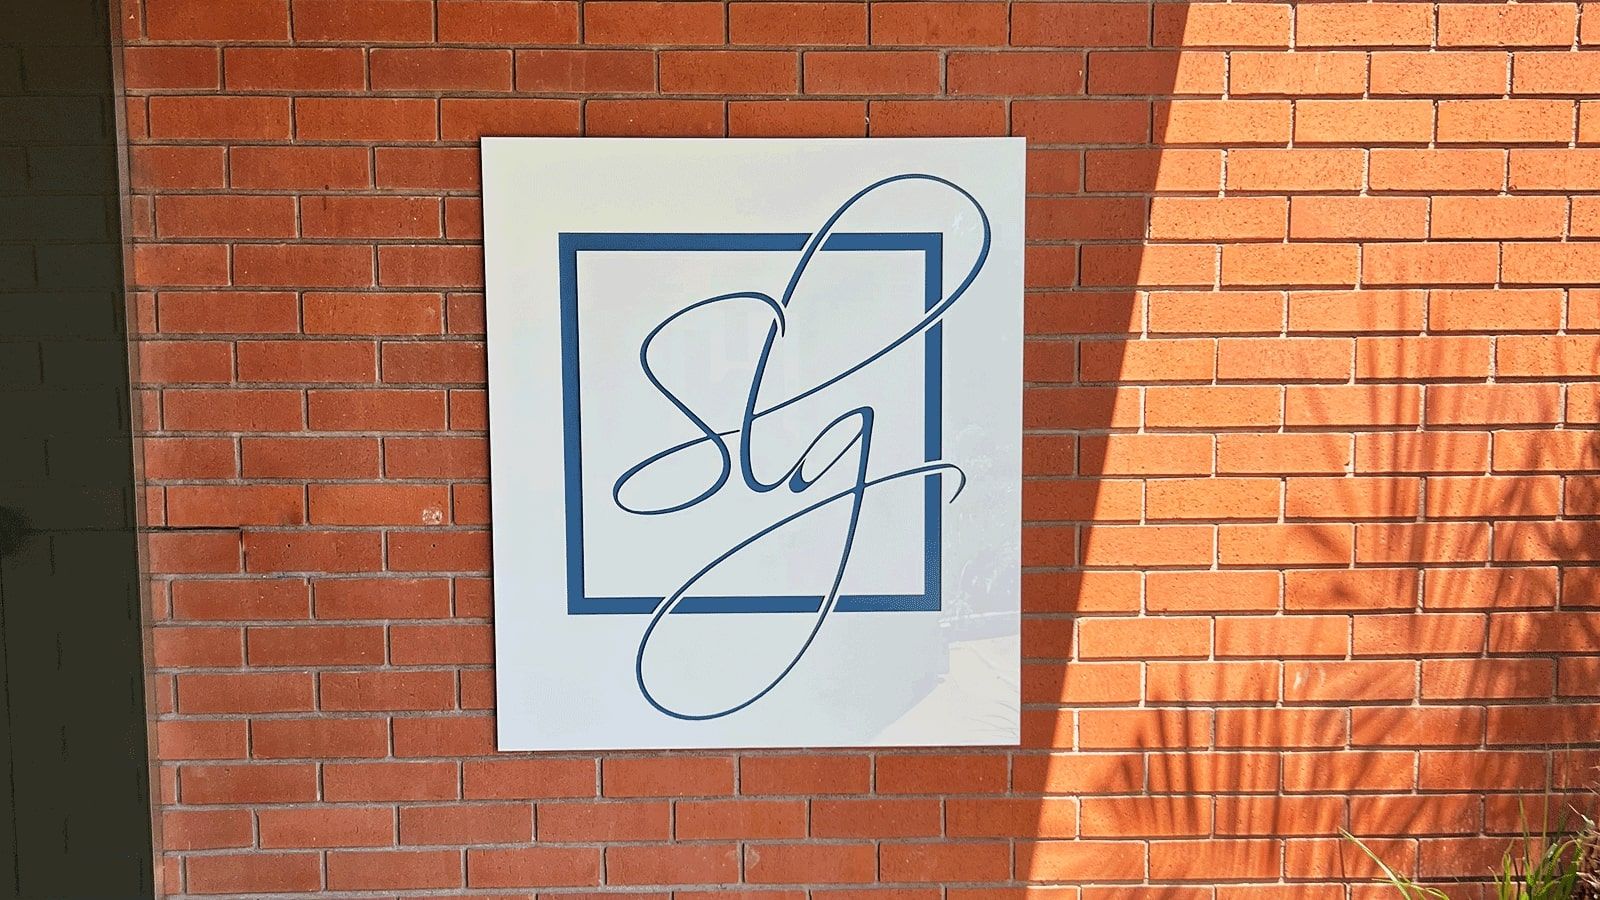 SLG Law firm wall signage installed outdoors